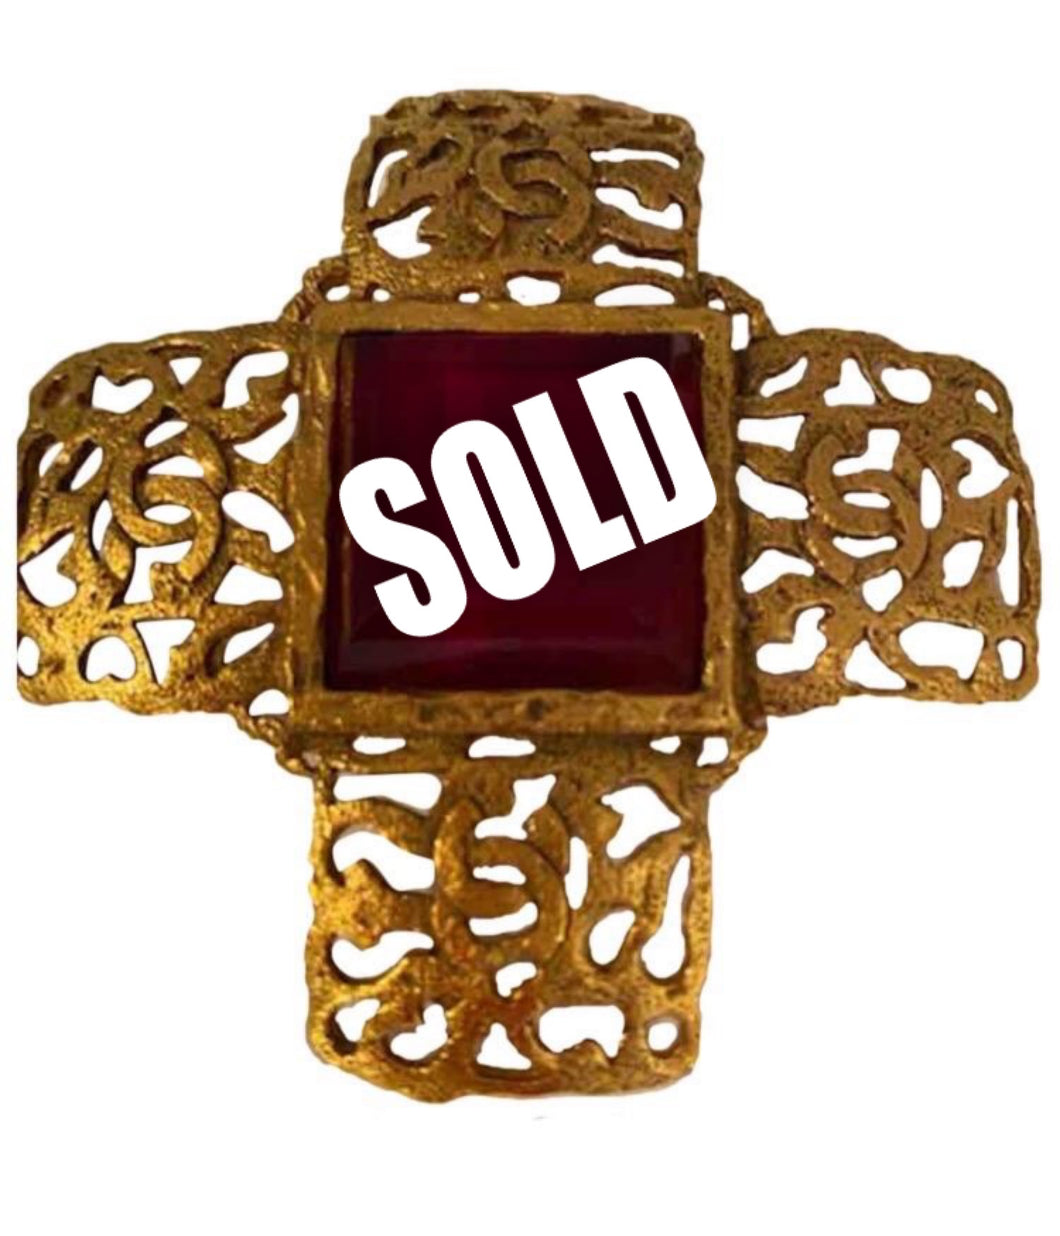 1980's Collection 25 Vintage Chanel Gold Cross Brooch Pin – HelensChanel